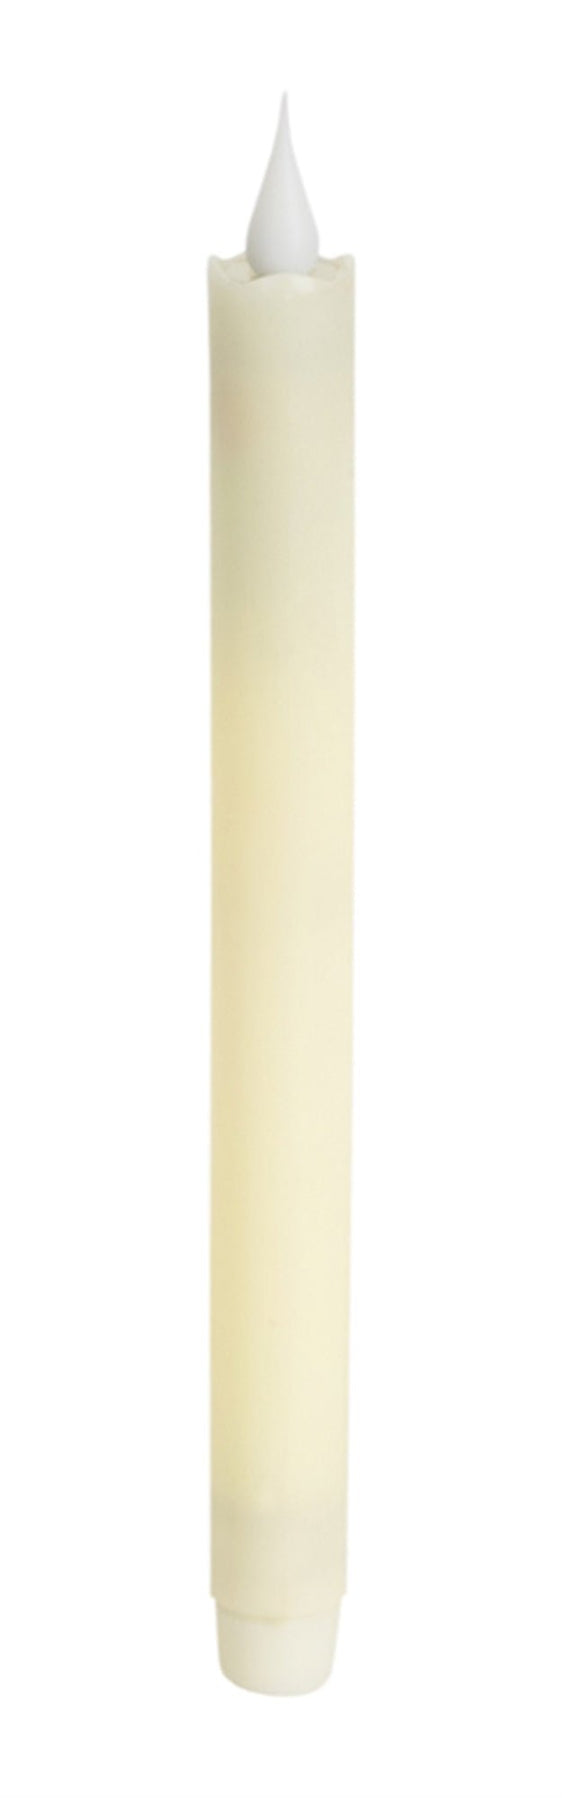 LED Wax Taper Candle with Moving Flame, Set of 4 - Candles